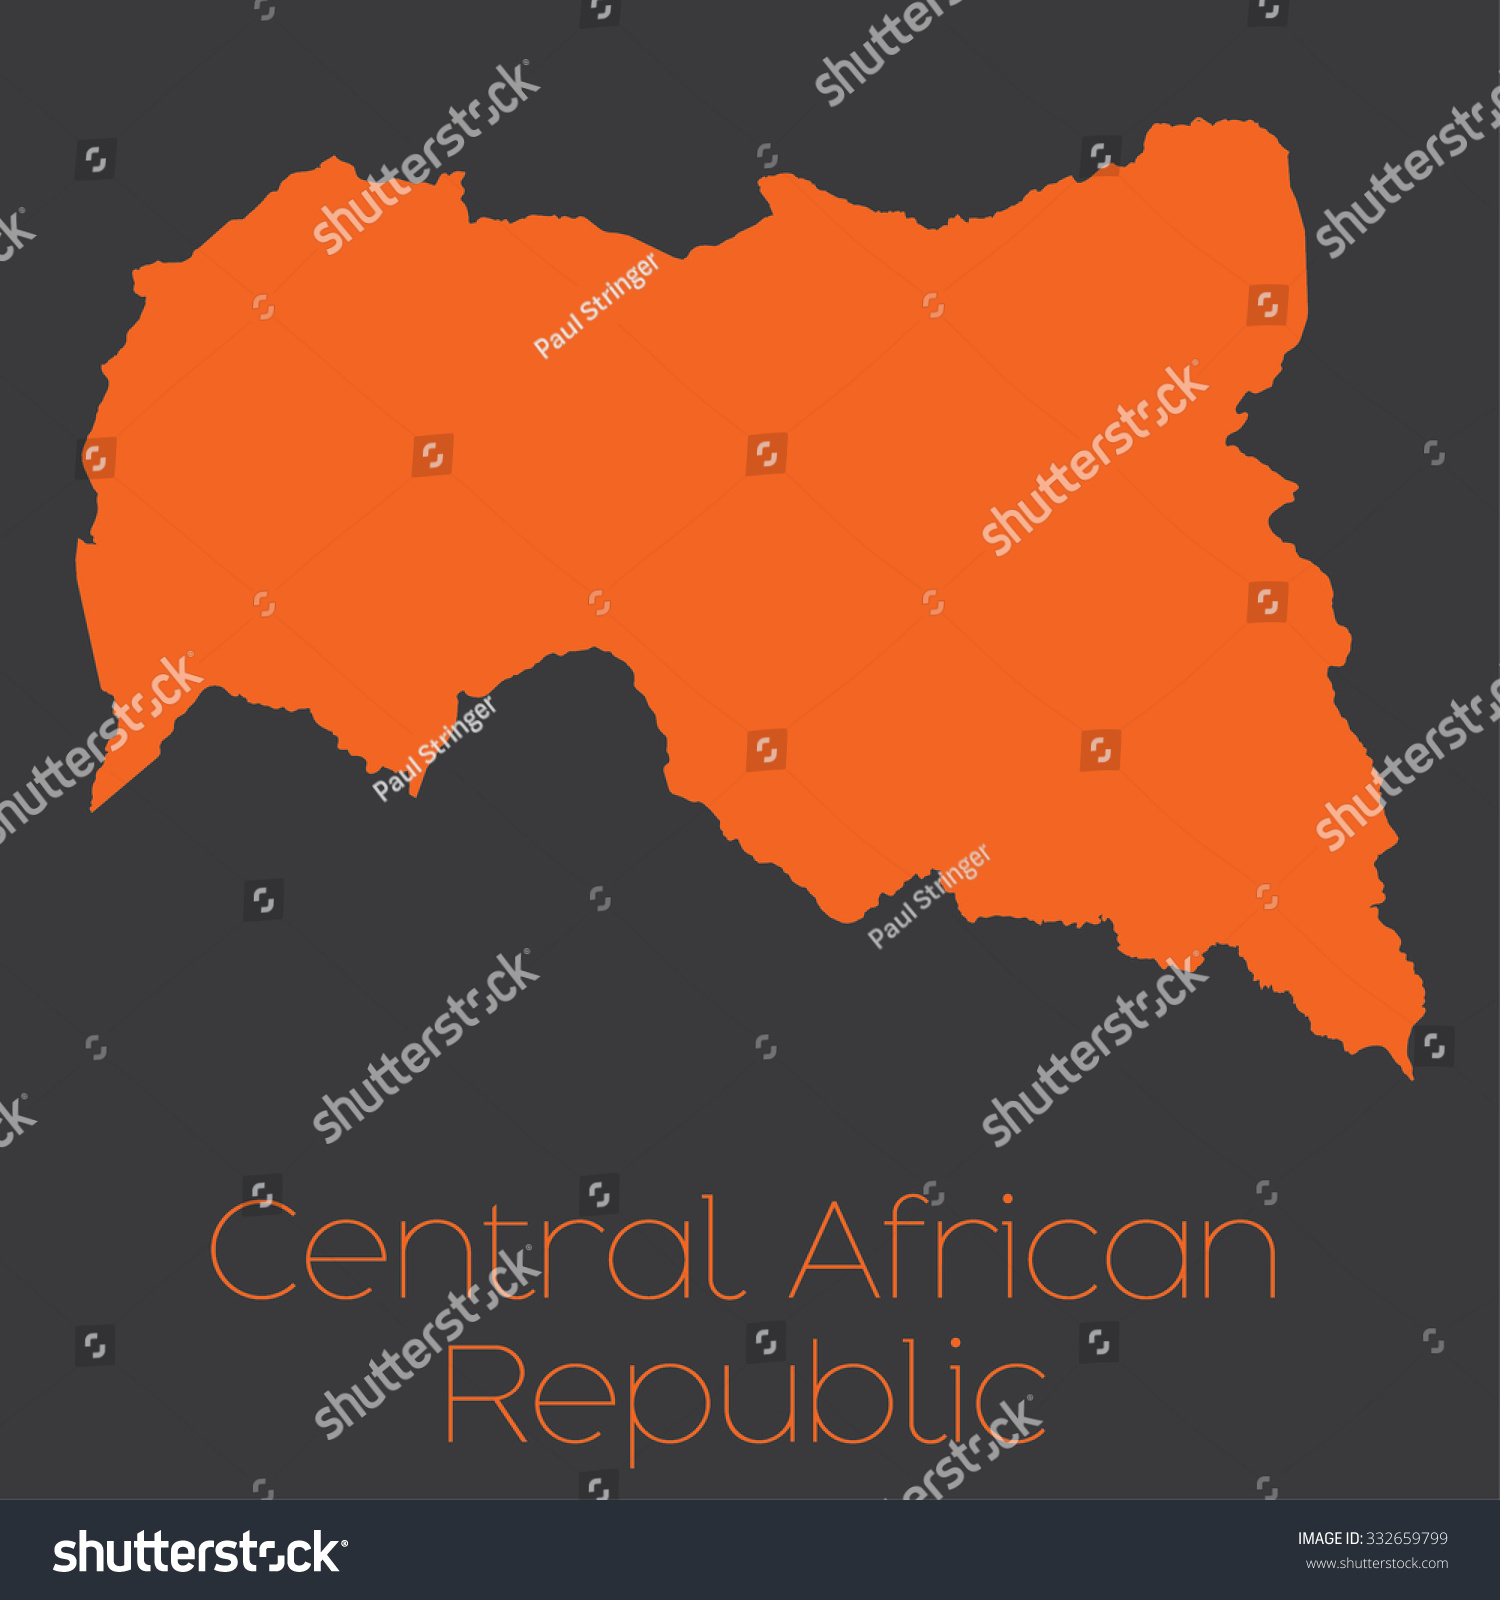 A Map Of The Country Of Central African Republic Royalty Free Stock Vector 332659799 2606